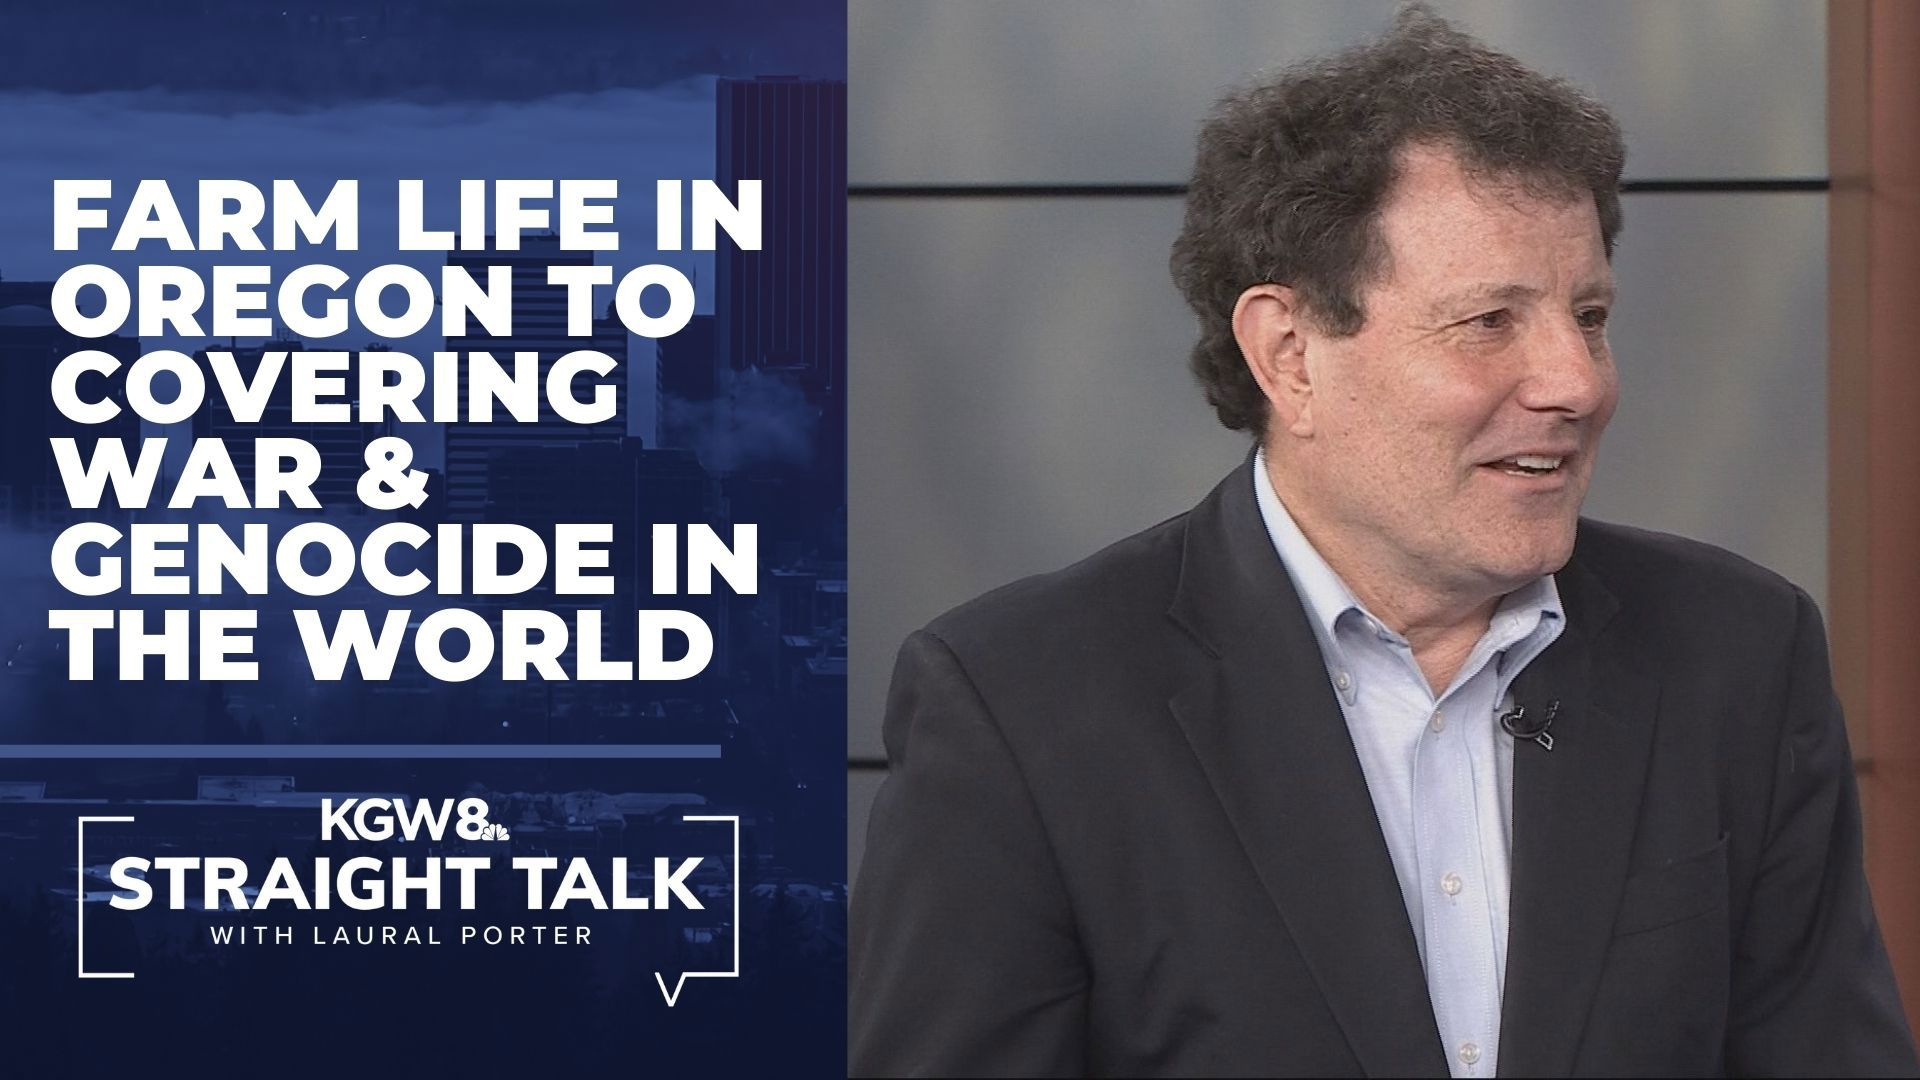 Pulitzer Prize Journalist Nicholas Kristof talks about his new book that details life on a farm in Yamhill County to becoming a daring reporter at the New York Times